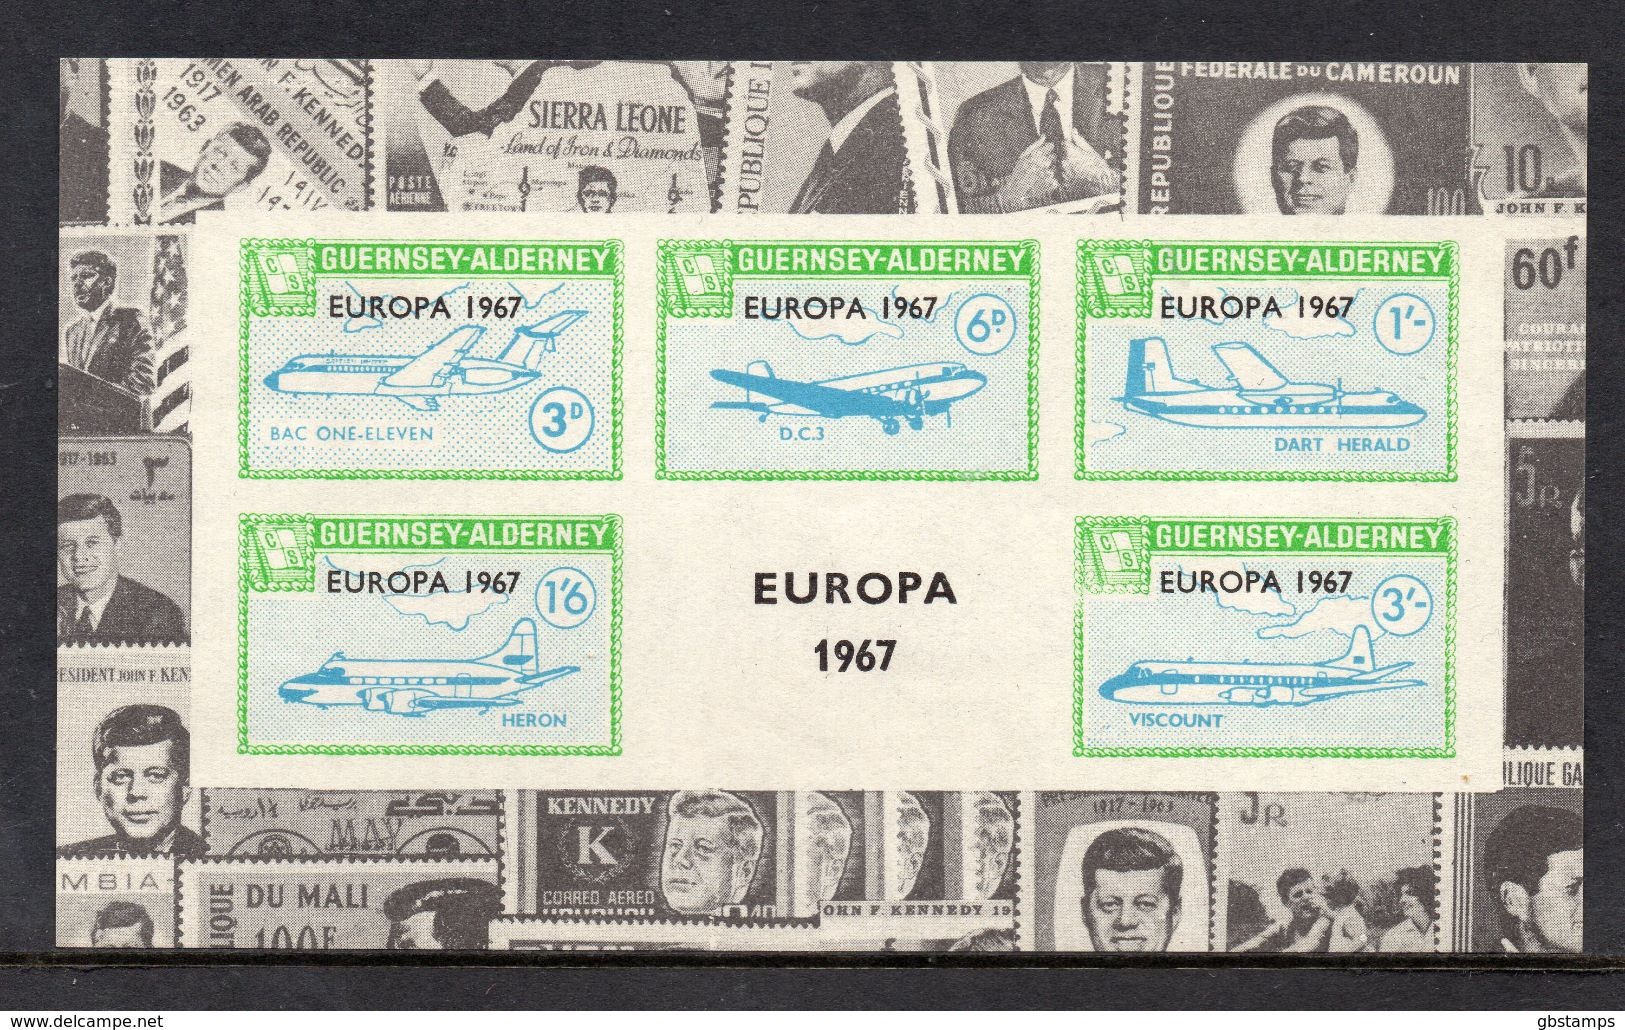 Guernsey Alderney Europa 1967 Imperf Miniature Sheet UM/MNH Featuring Aircraft As Scanned - Local Issues